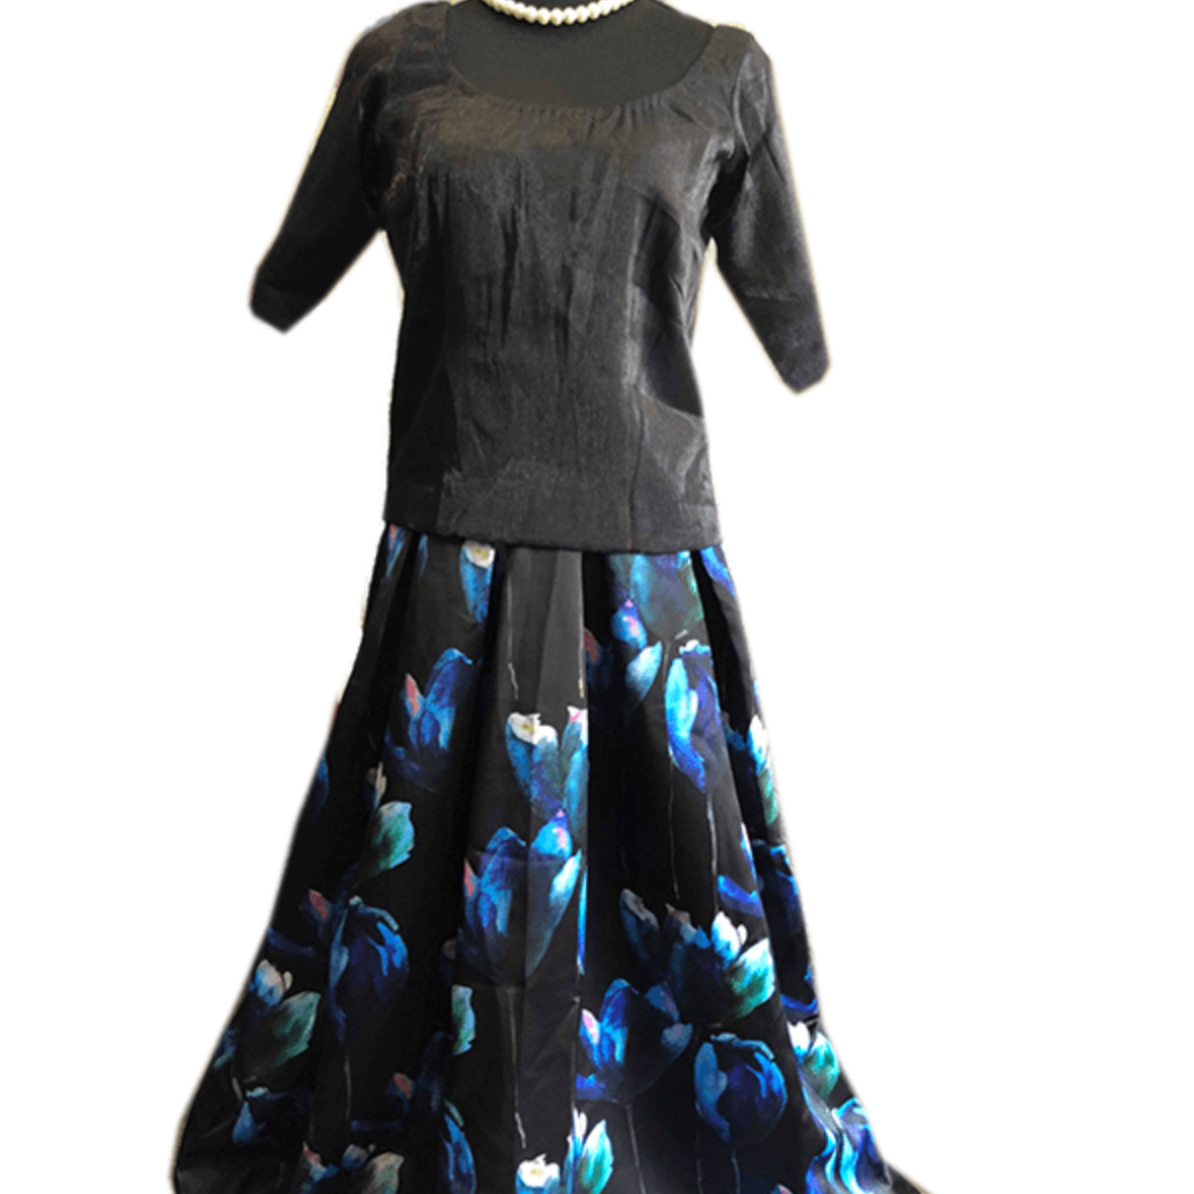 Floral Skirt with Black Blouse 